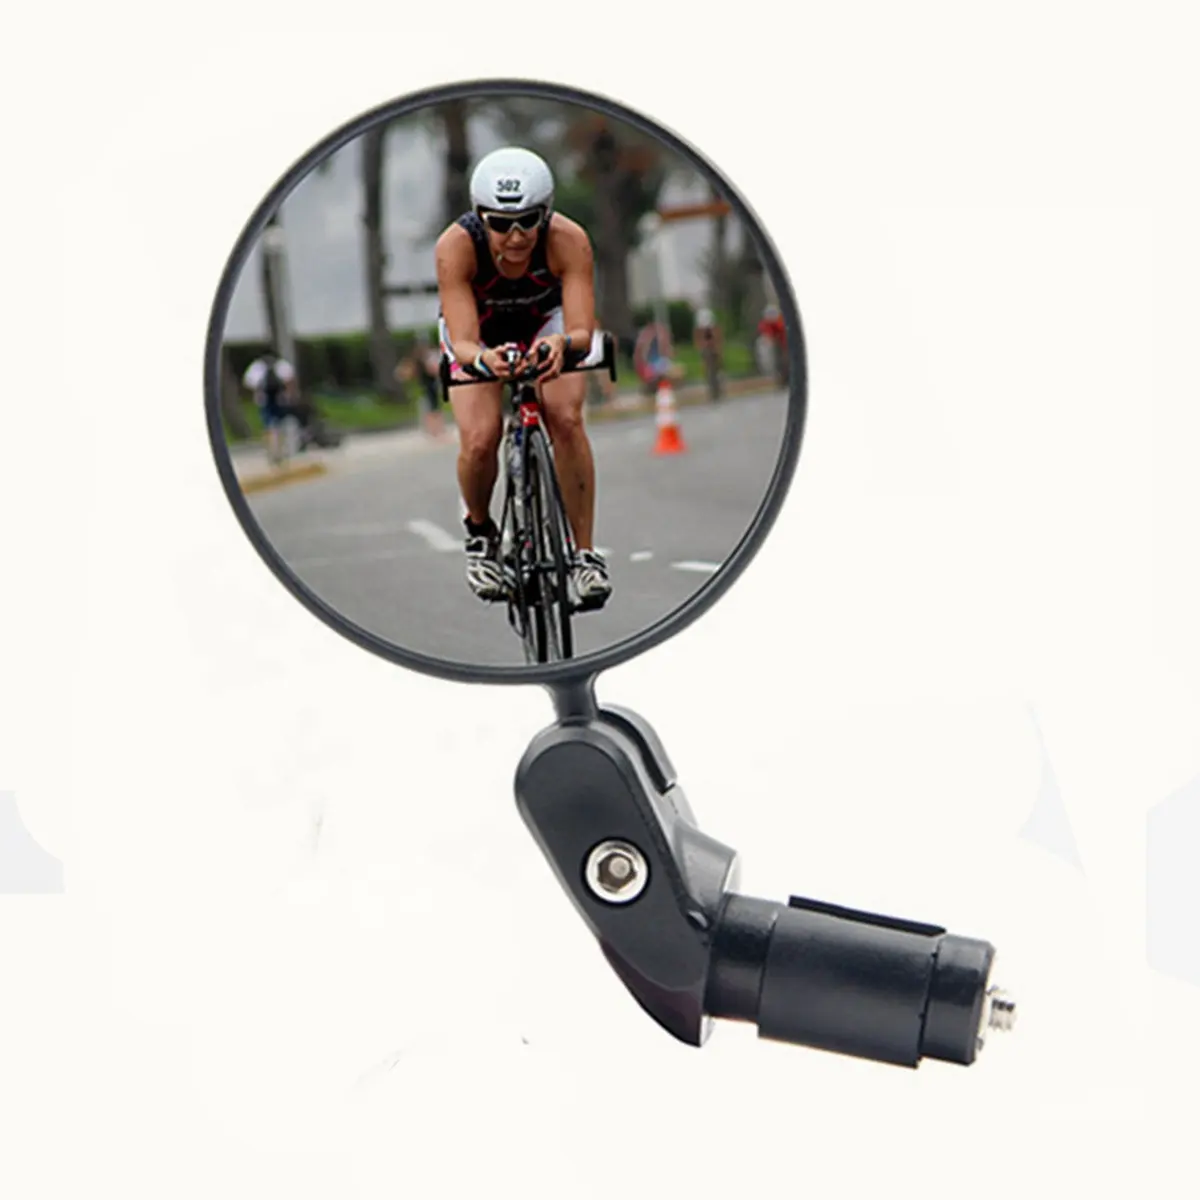 V00032900 Bicycle View Mirror Bike Cycling Clear Wide Range Back Sight Reaview Adjustable Handlebar Left Right Mirror